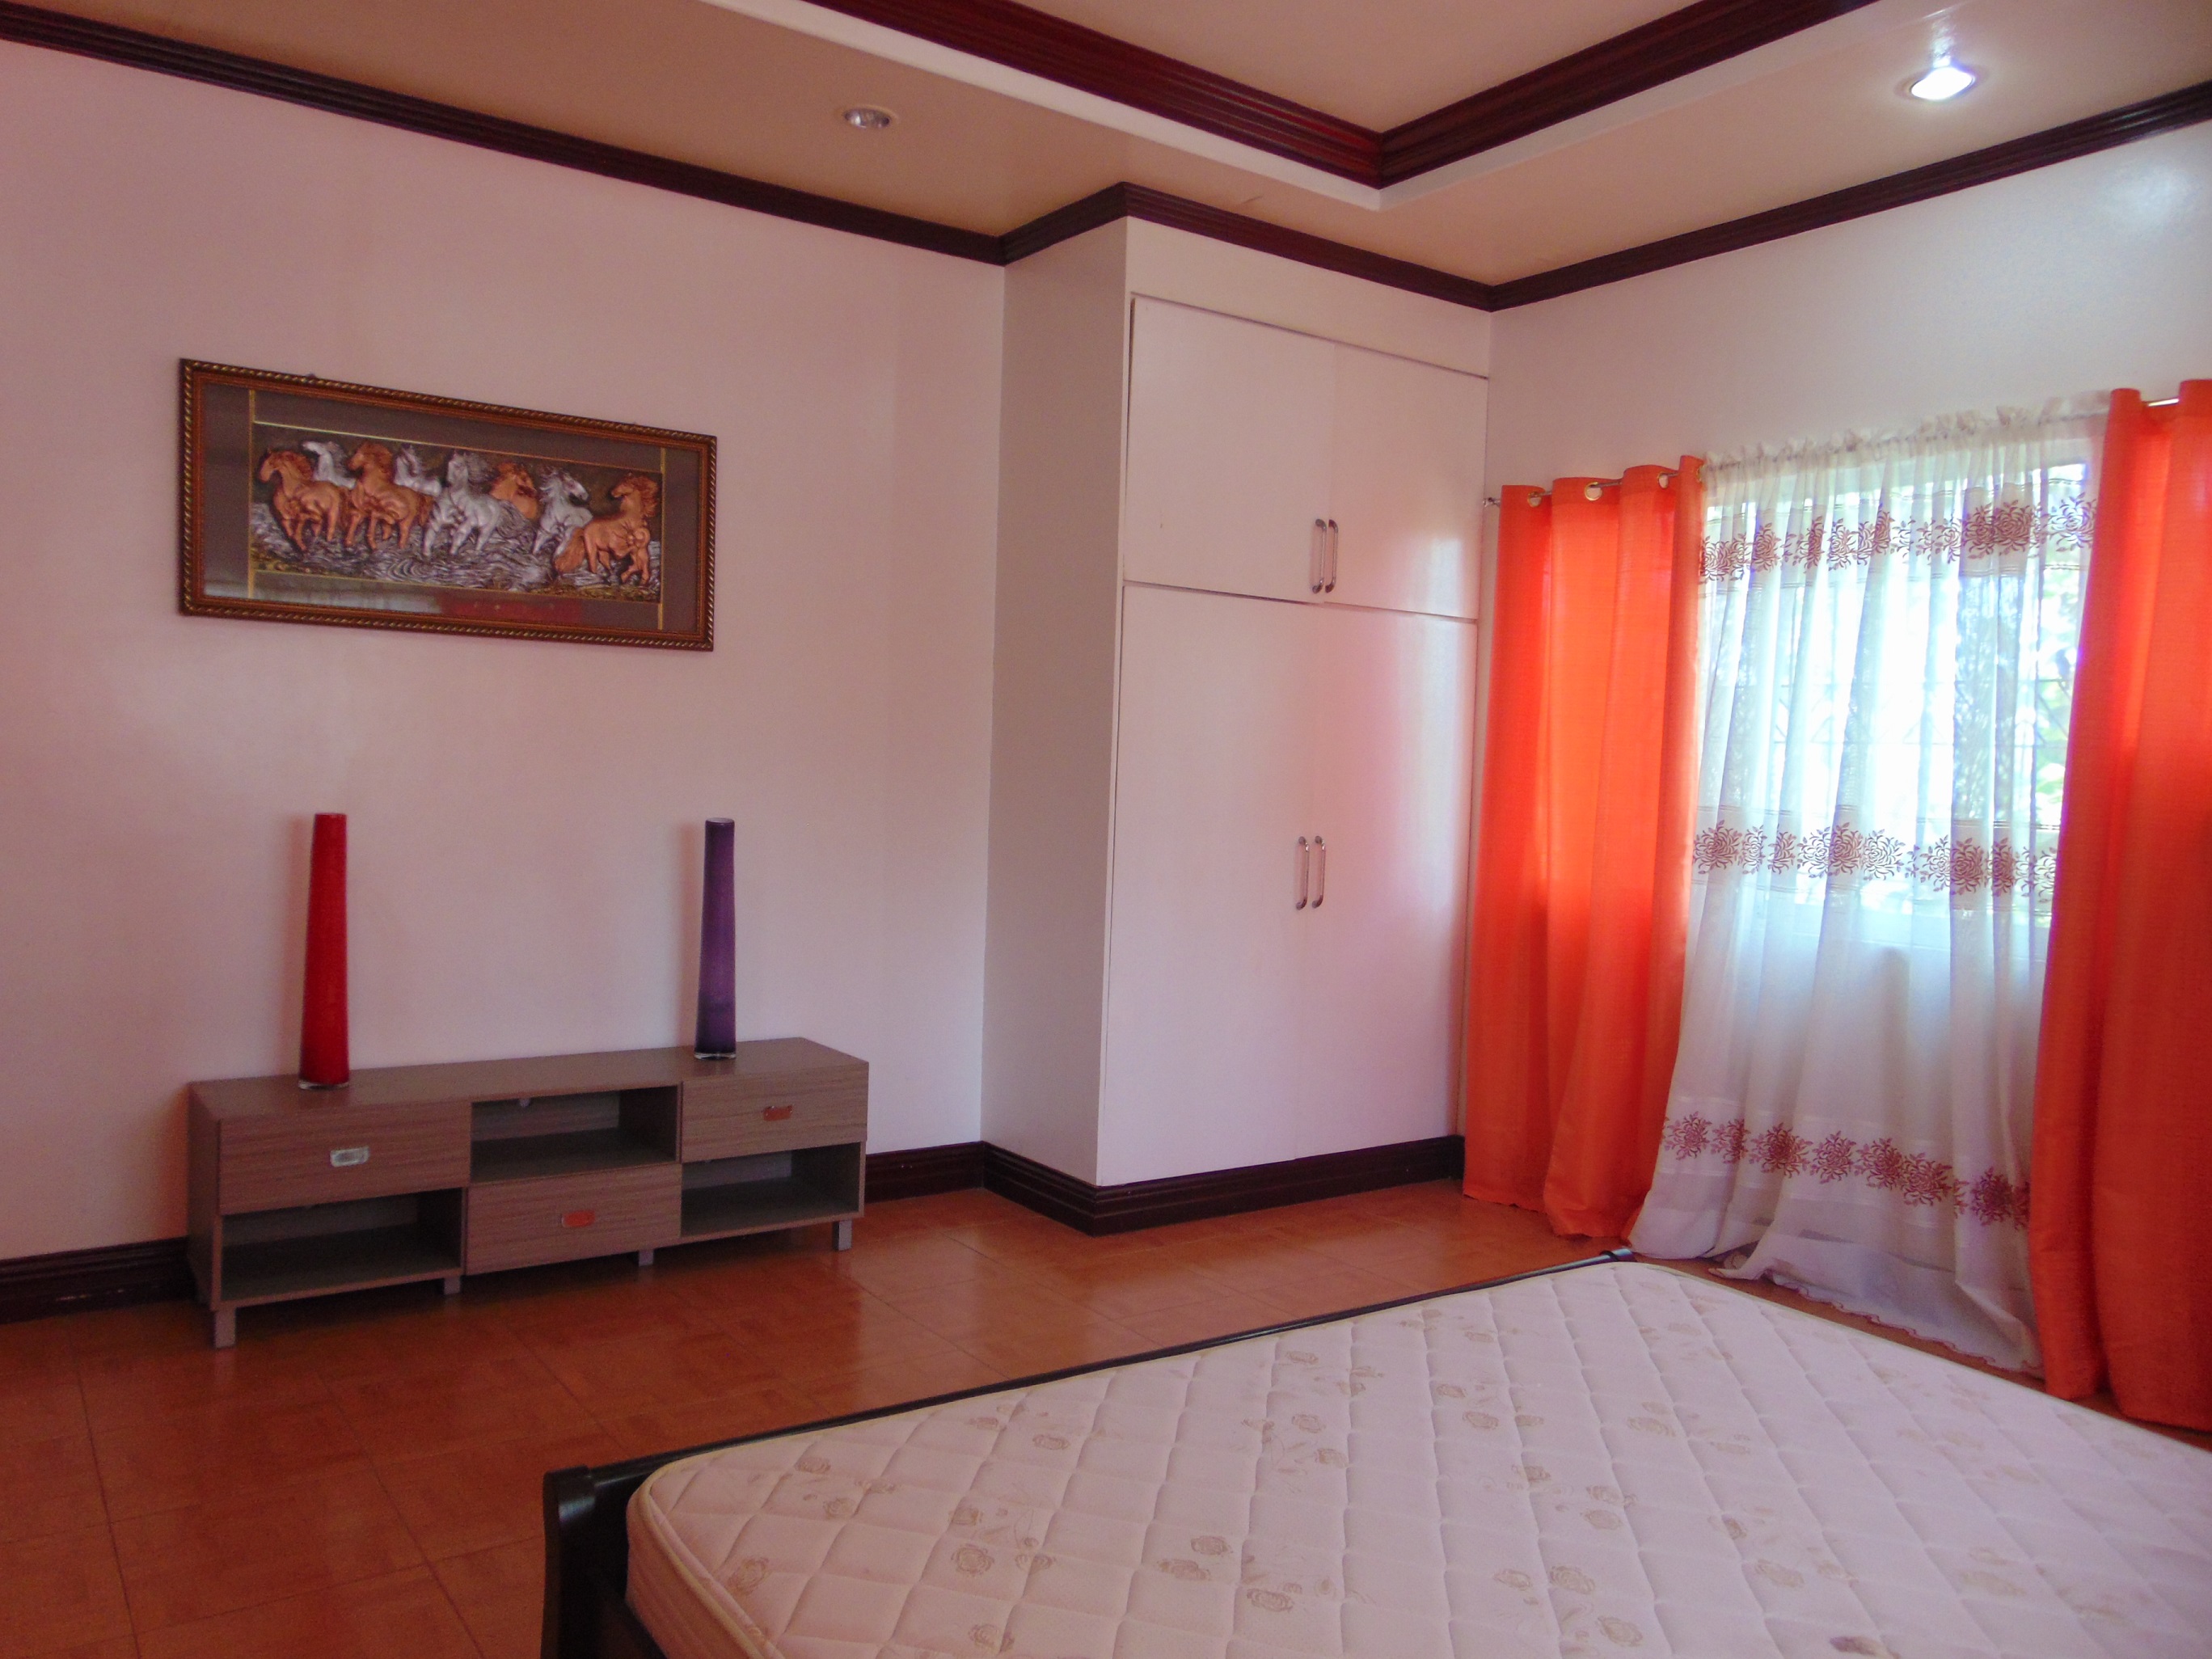 4-bedrooms-house-and-lot-located-in-talisay-city-cebu